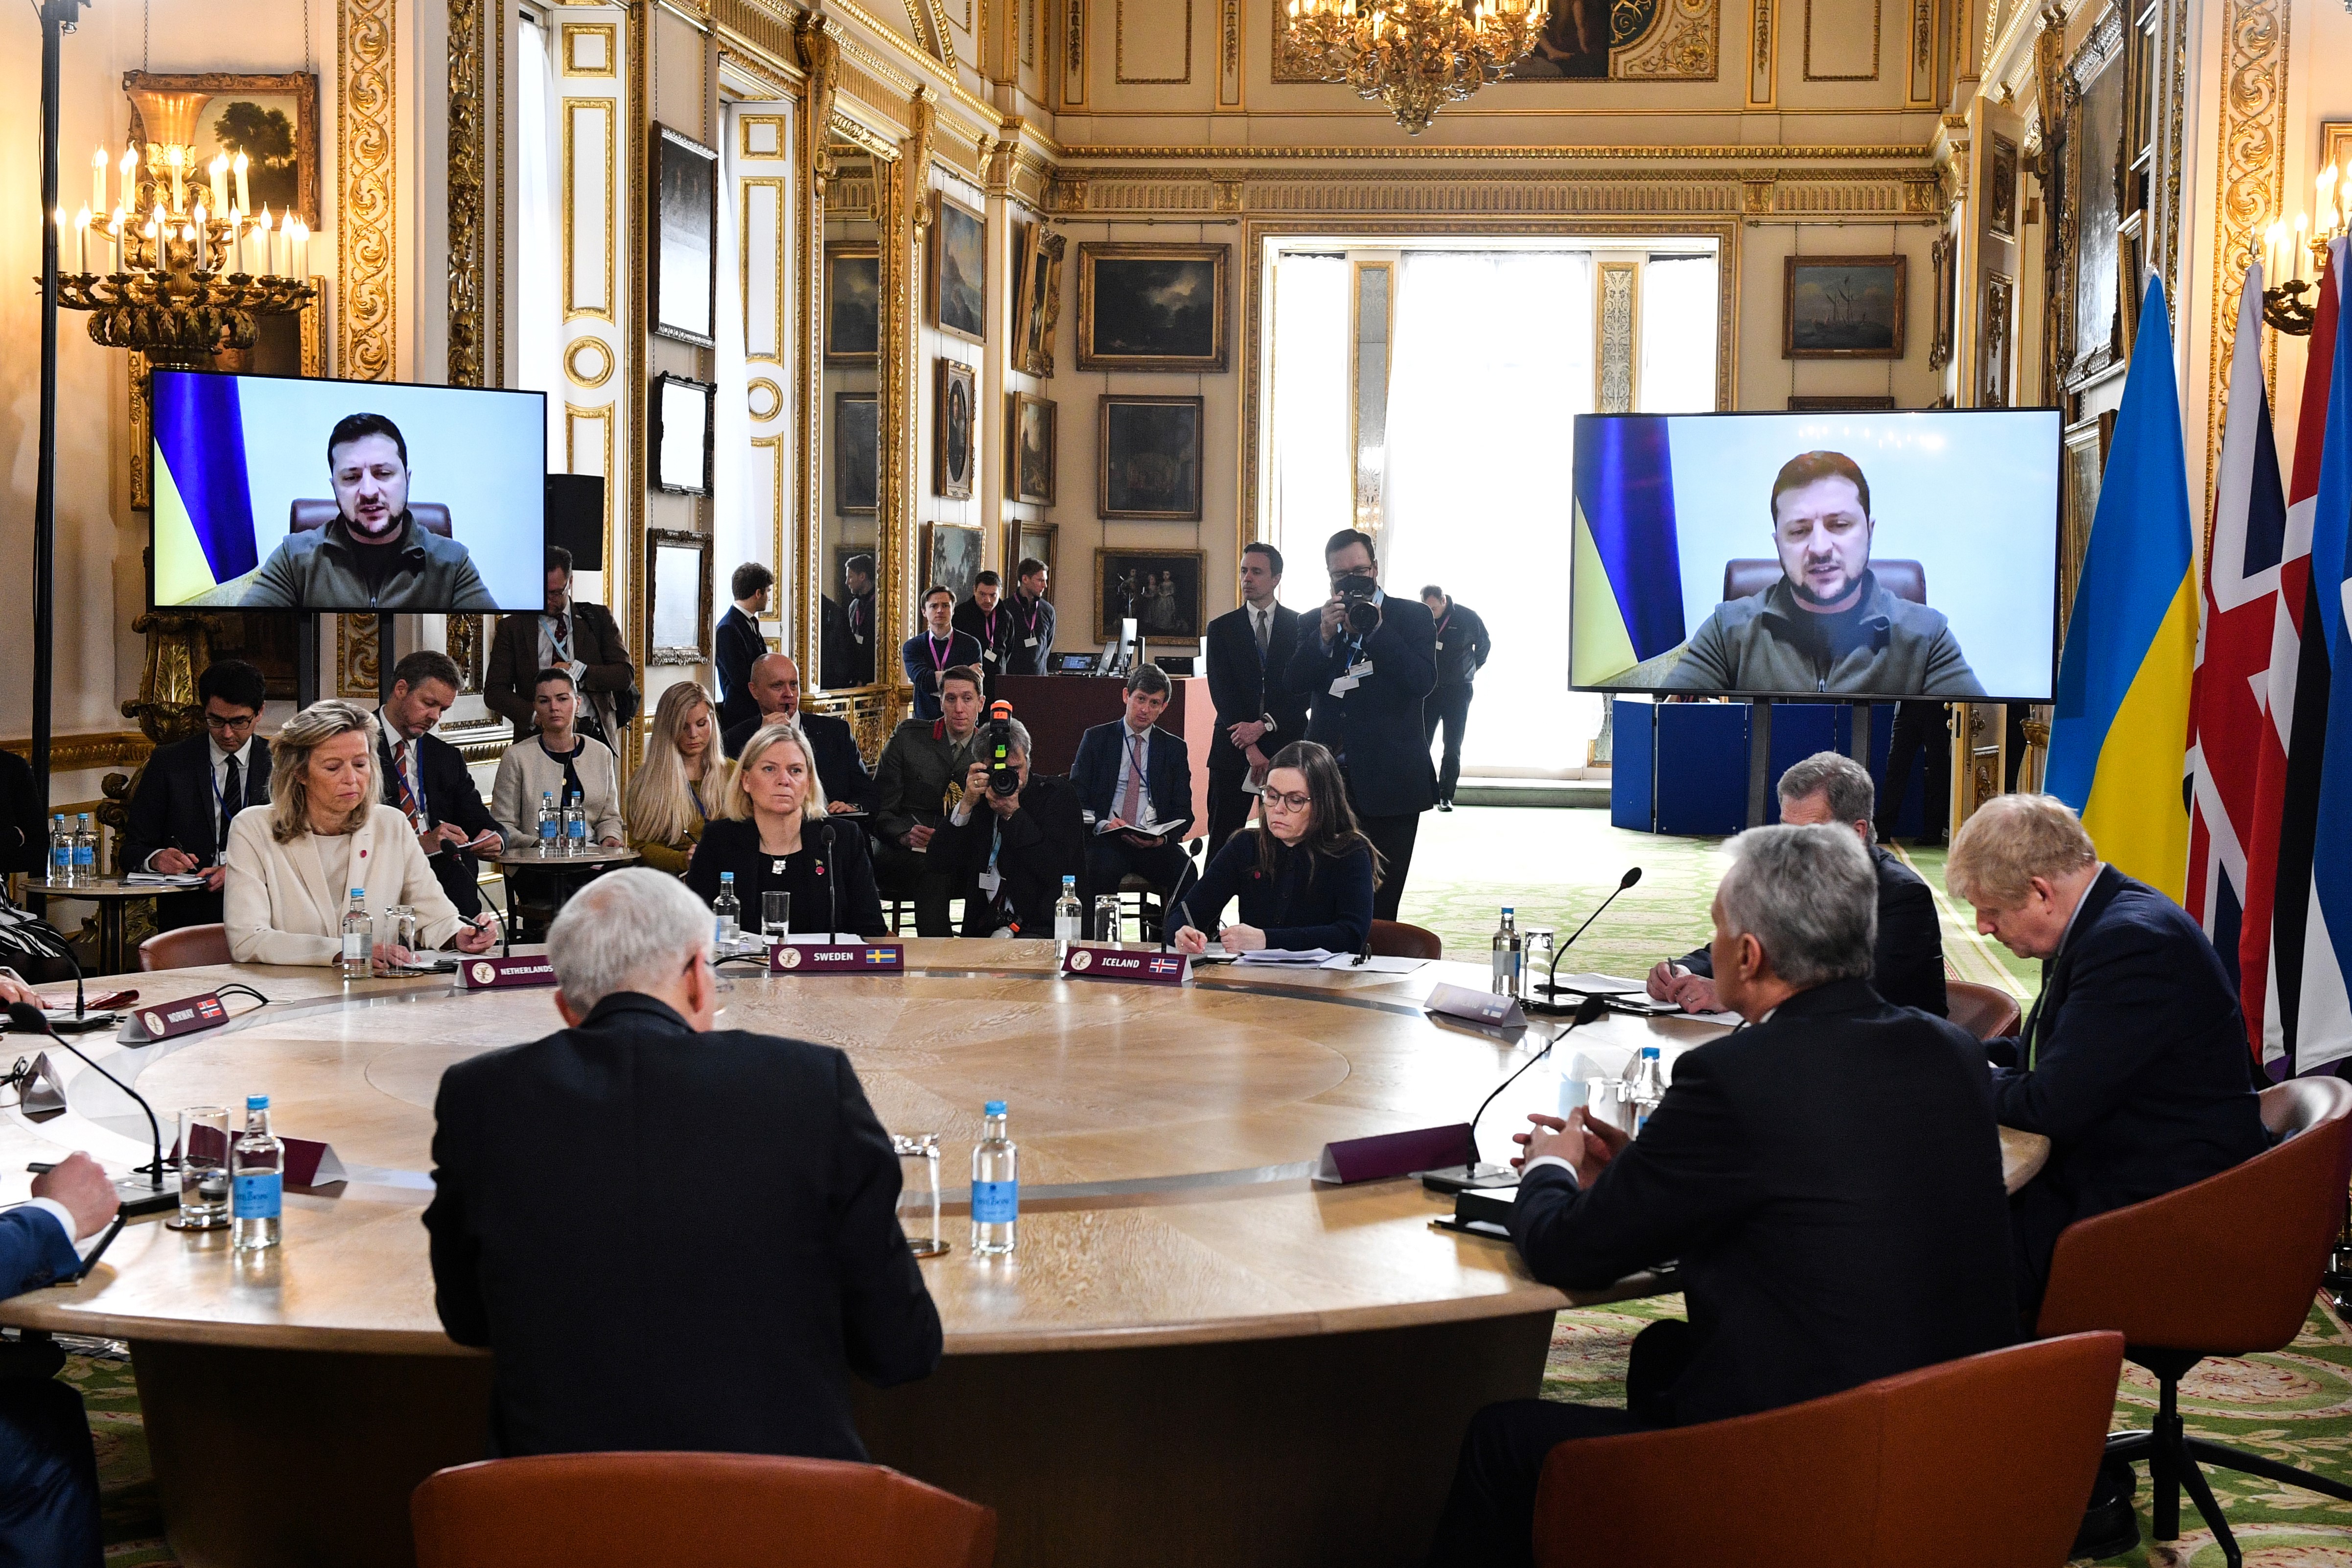 Ukraine's President Volodymyr Zelensky addresses by video link a meeting of the leaders of the Joint Expeditionary Force (JEF) at Lancaster House on March 15 in London, England.